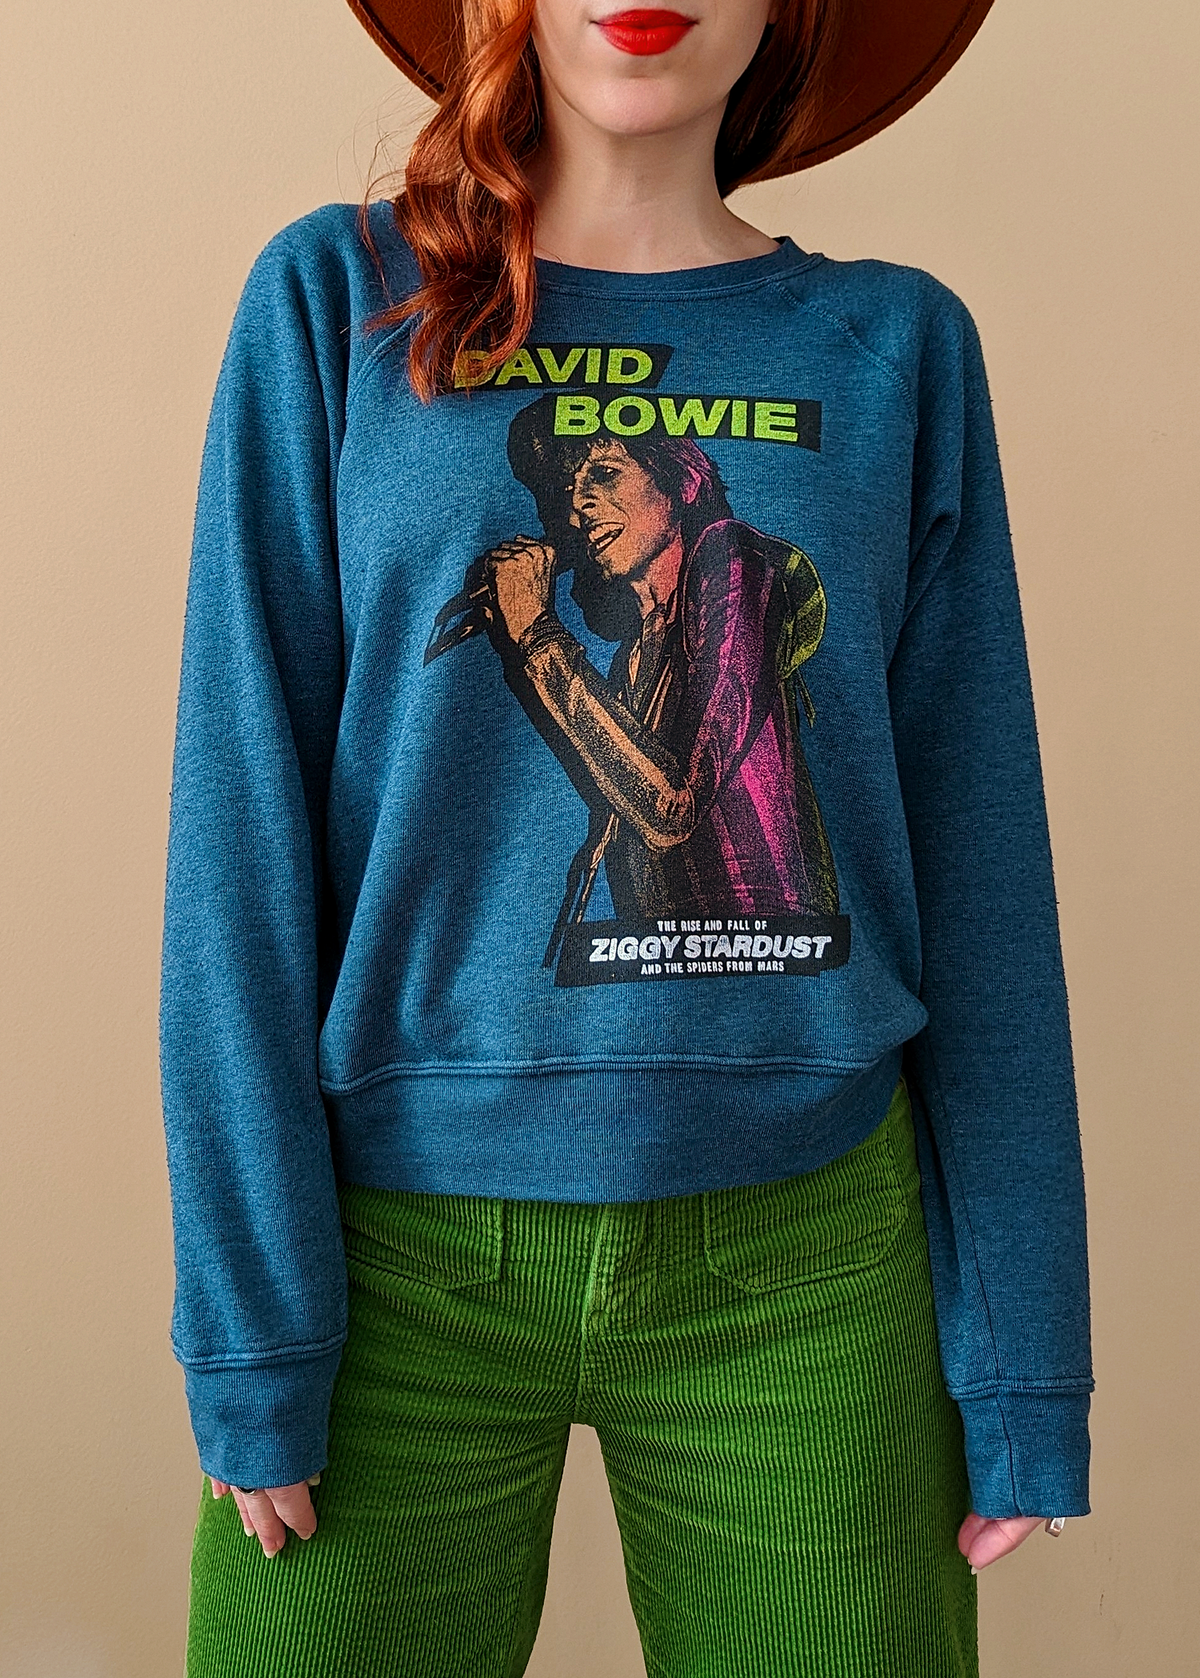 Super soft David Bowie Ziggy Stardust raglan crew neck sweatshirt in teal by Daydreamer LA, made in California and officially licensed